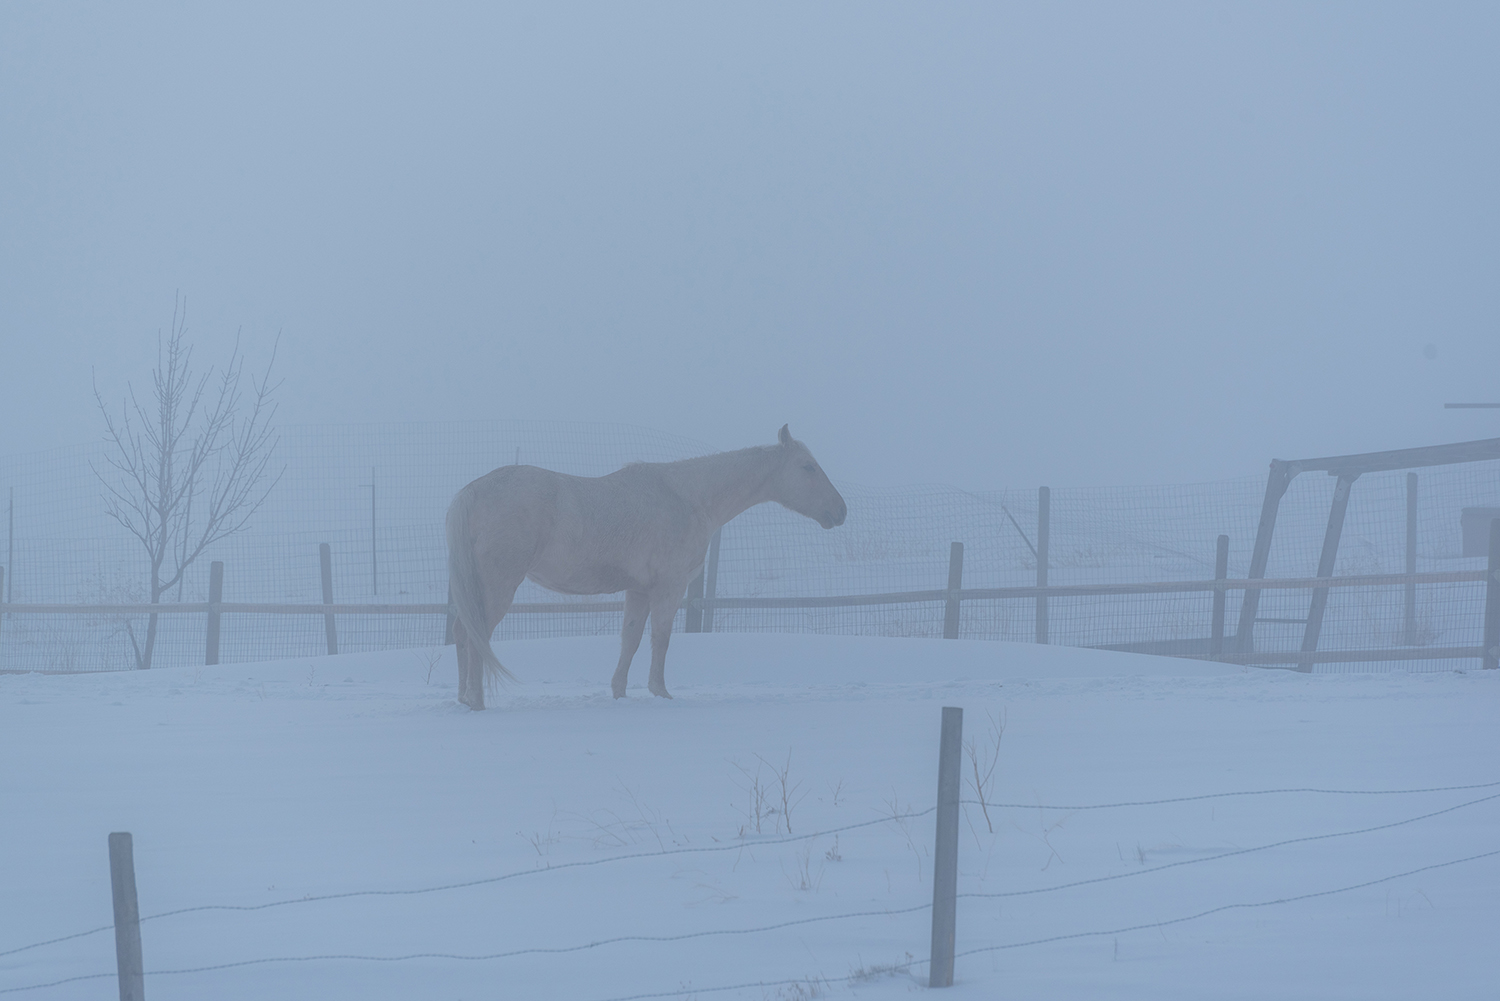 Horse standing in stable full of snow